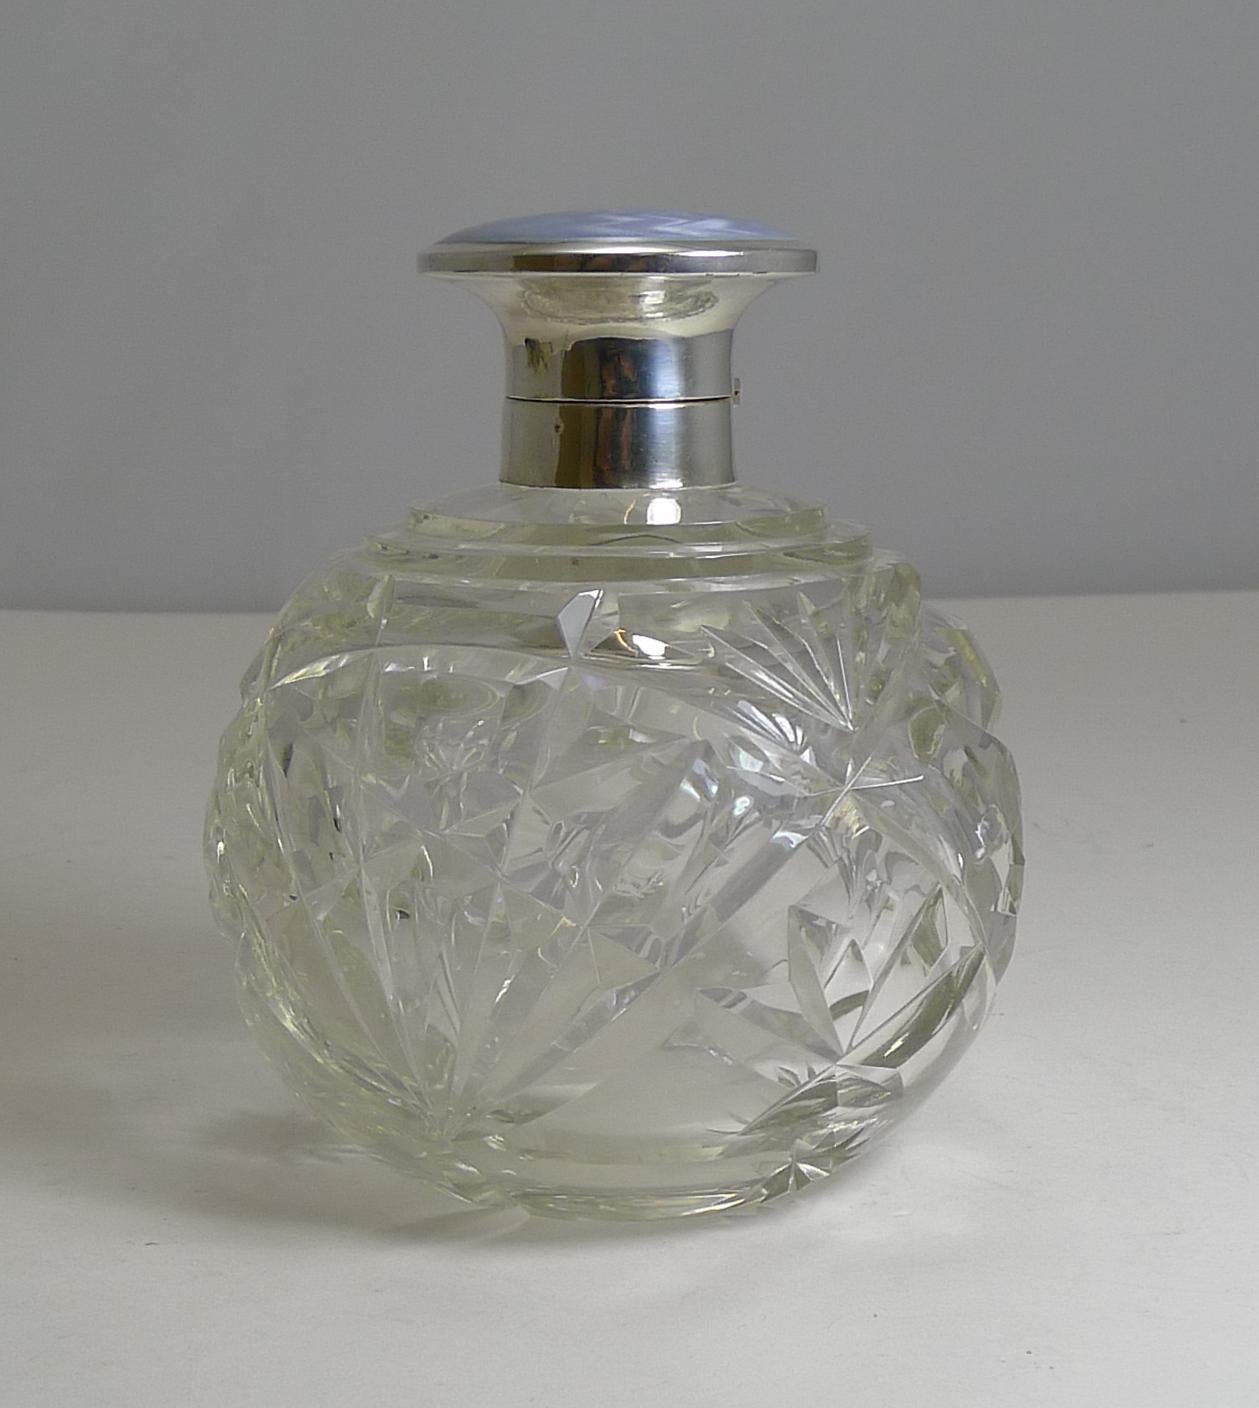 A wonderfully impressive sized perfume or scent bottle created from a hefty piece of English crystal beautifully handcut. The collar and hinged lid is made from English sterling silver fully hallmarked Birmingham 1918. The makers initials are also